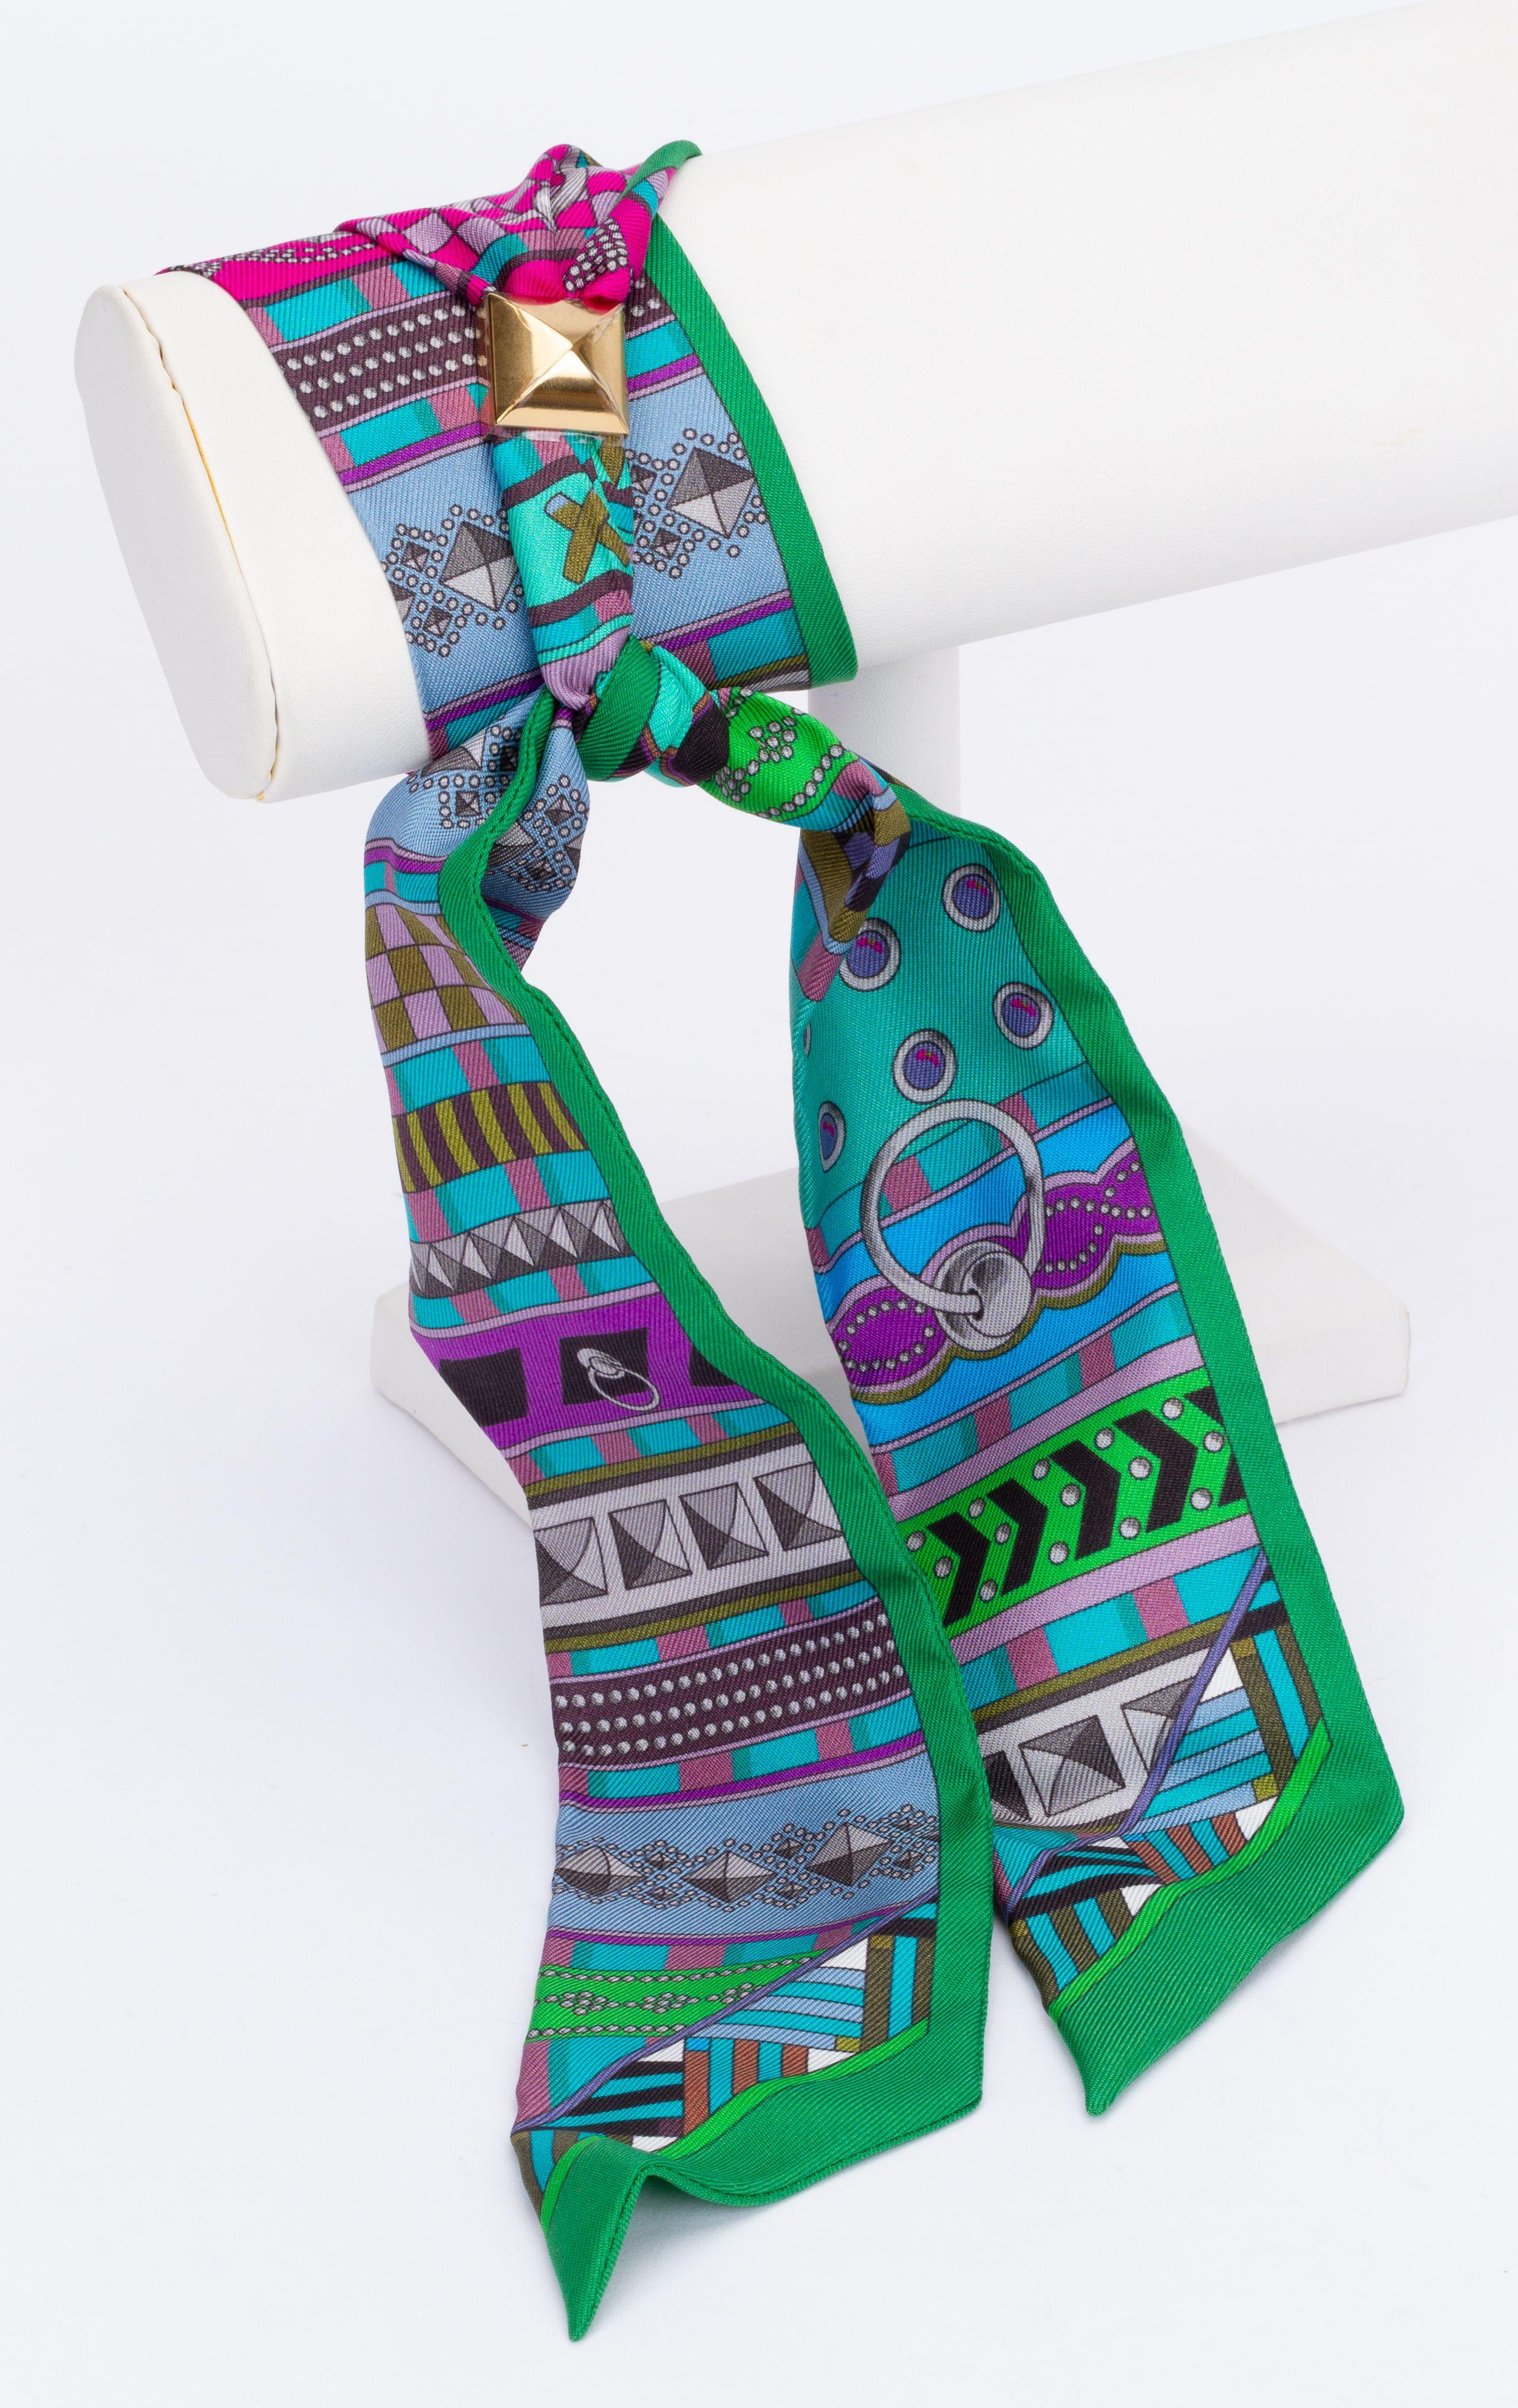 New Hermès Architecture Twilly. The scarf is made out of silk and is multicolor. The print shows different forms and architectural lines. The pieces comes with a scarf ring, the original box and ribbon.
